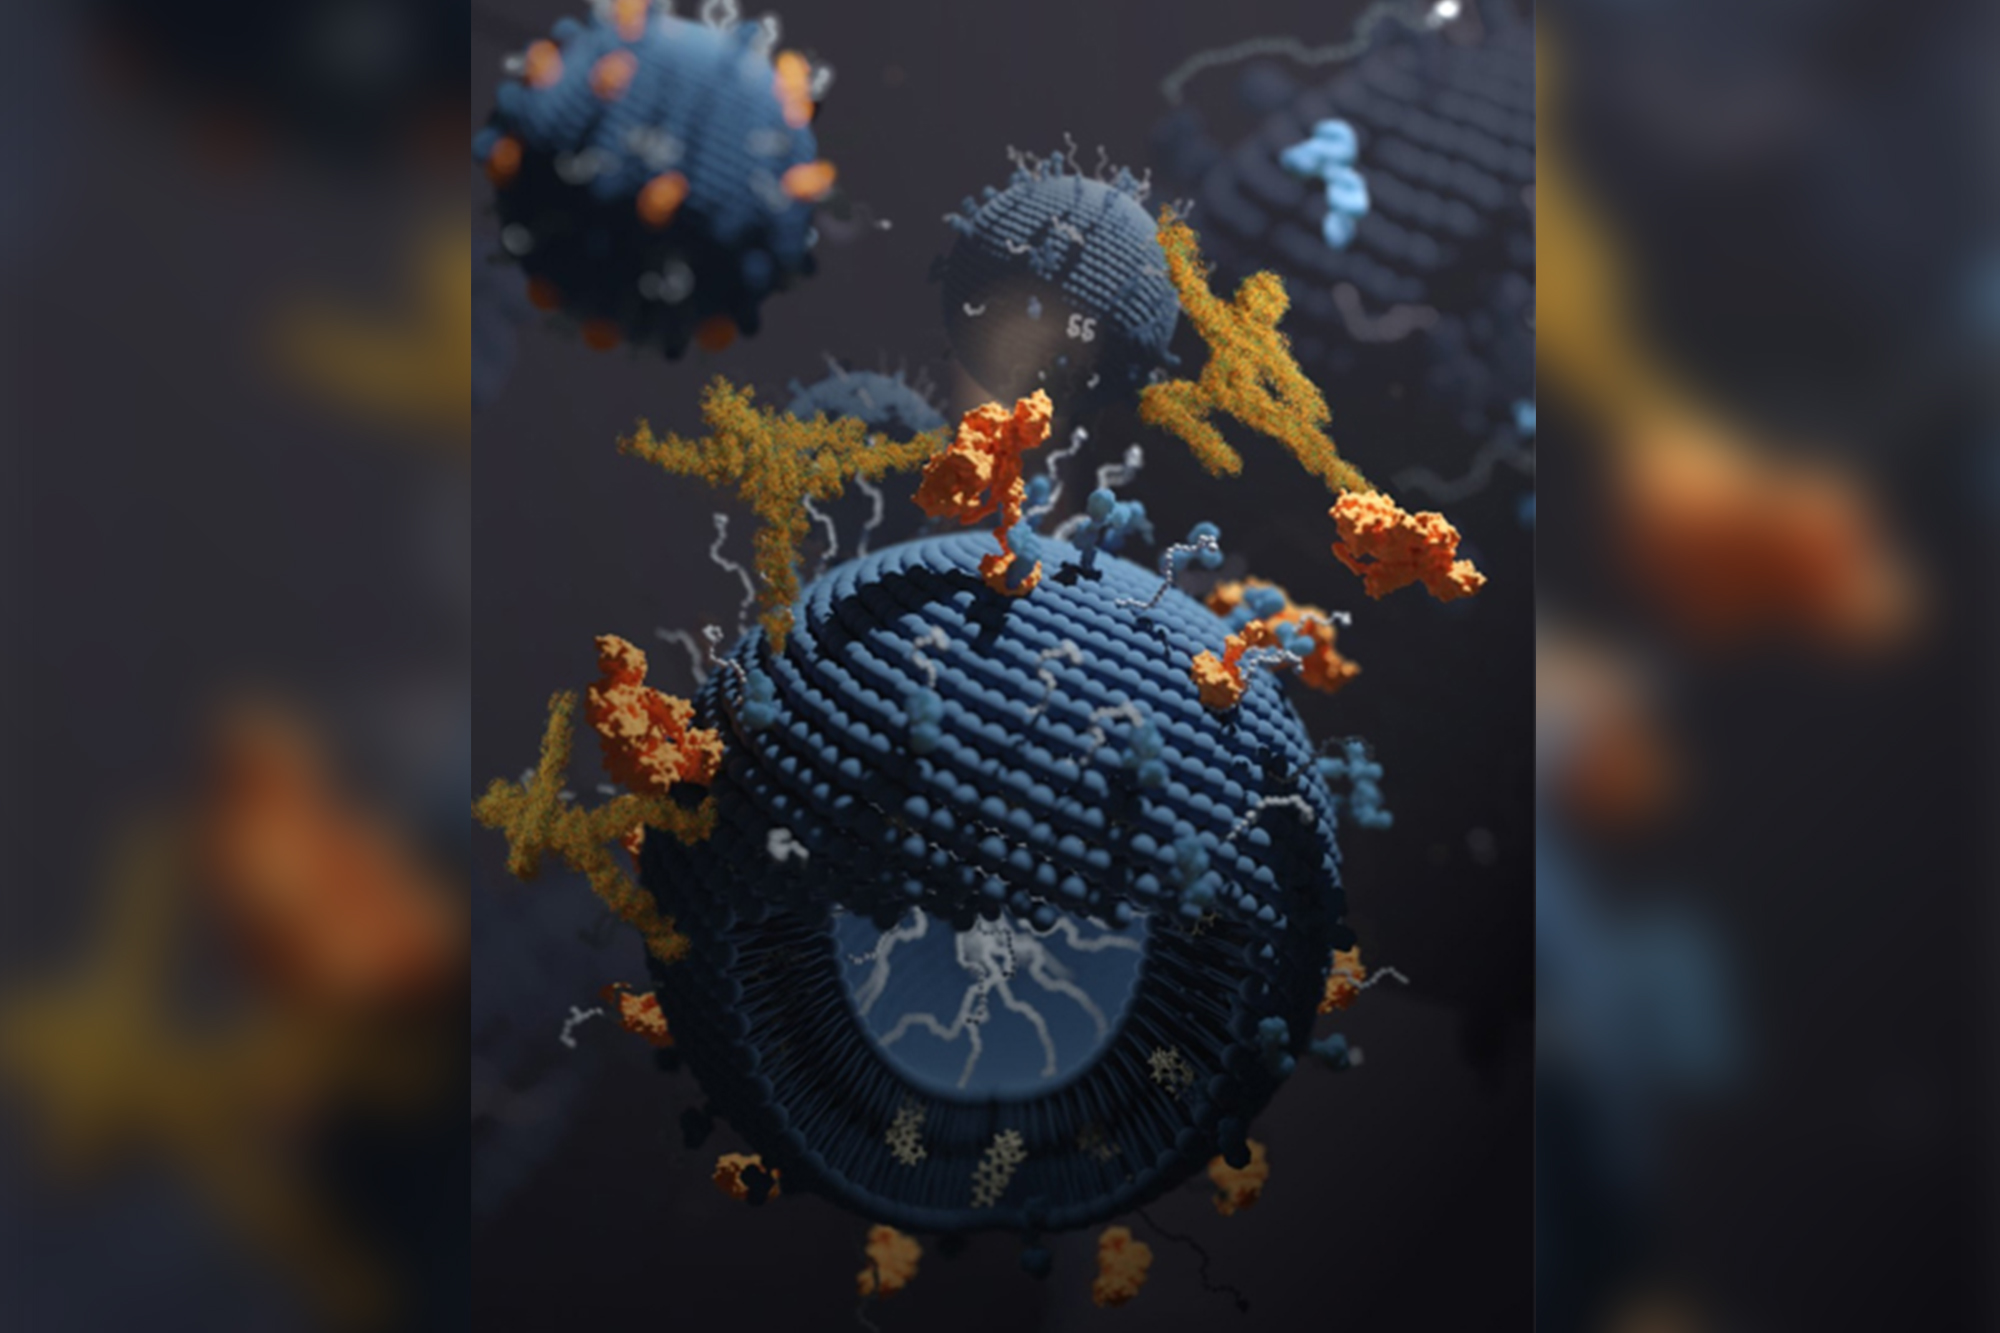 A new method to increase effectiveness of nanomedicines